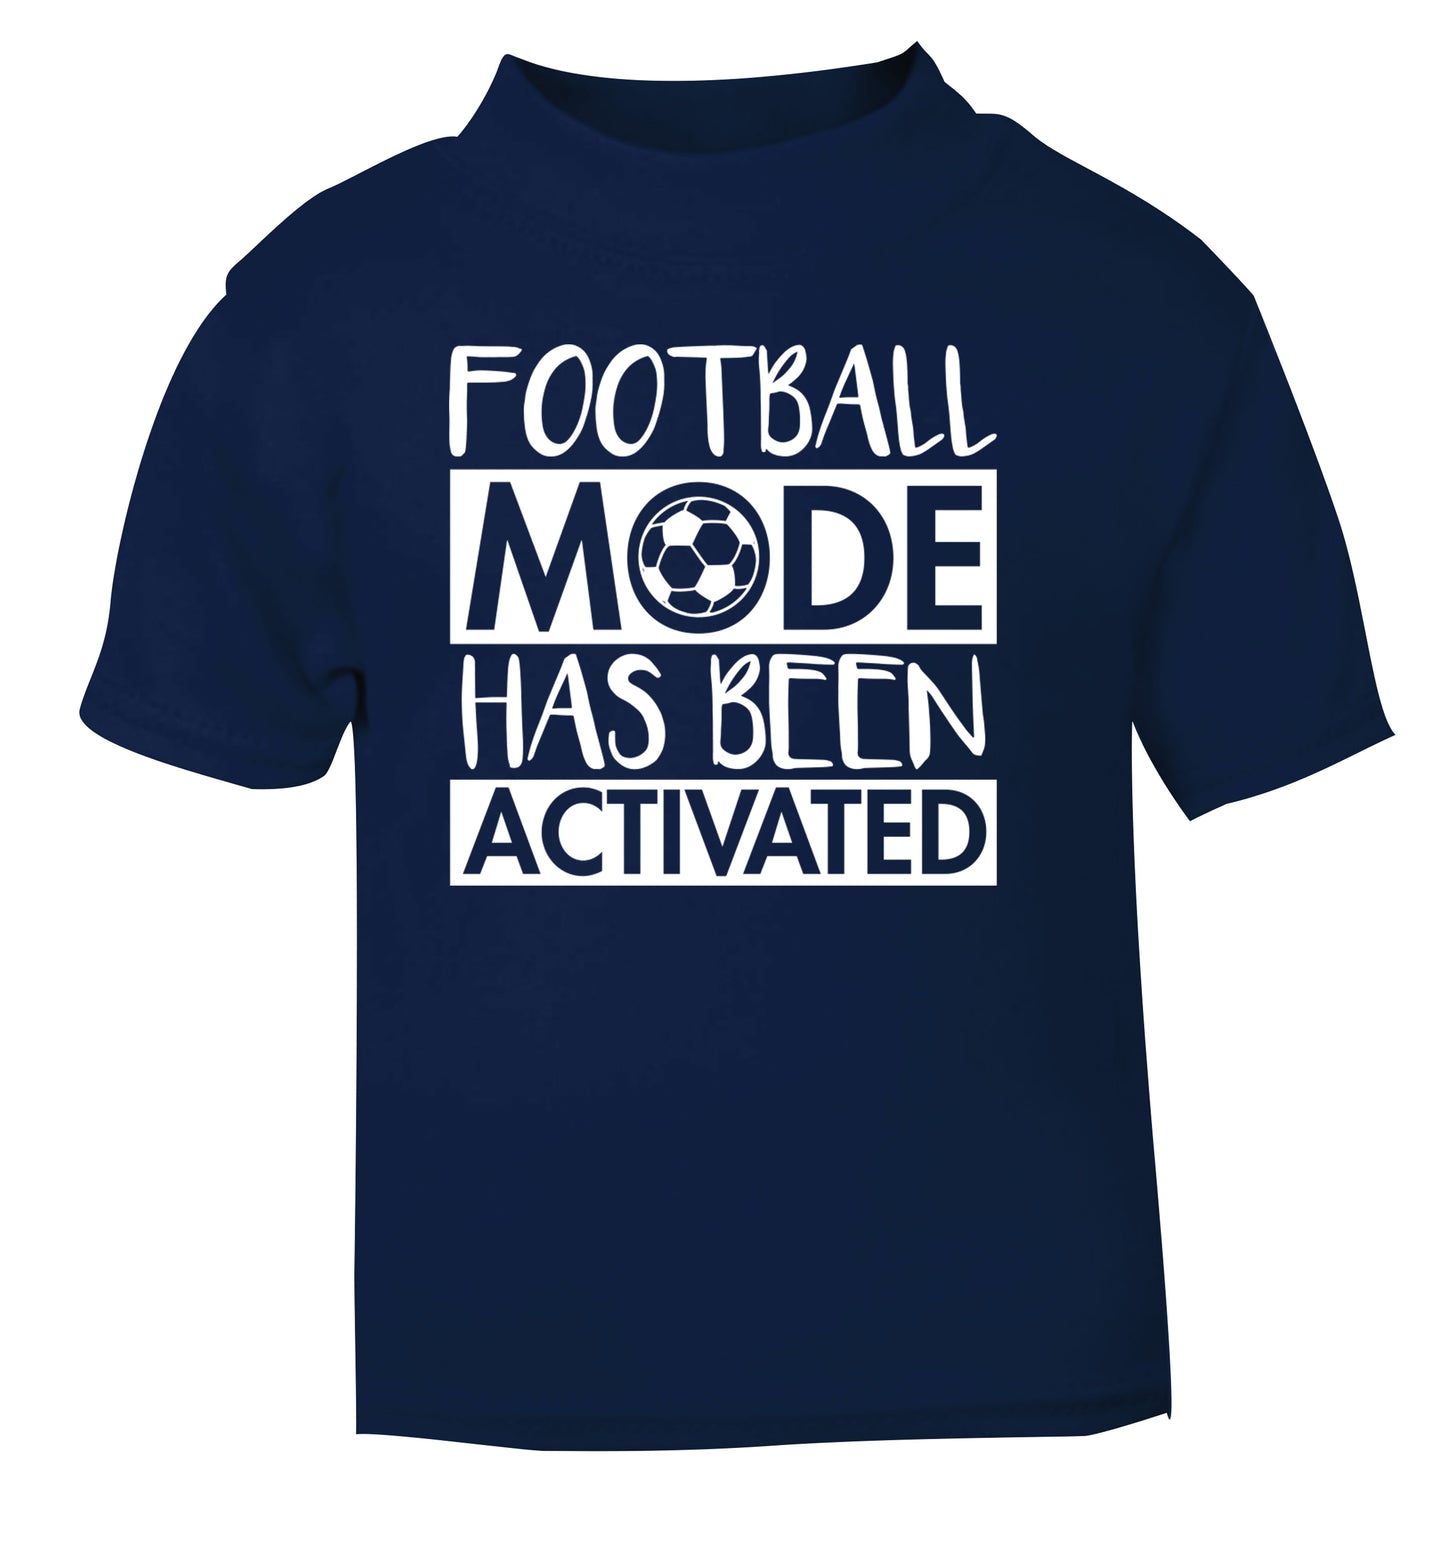 Football mode has been activated navy Baby Toddler Tshirt 2 Years